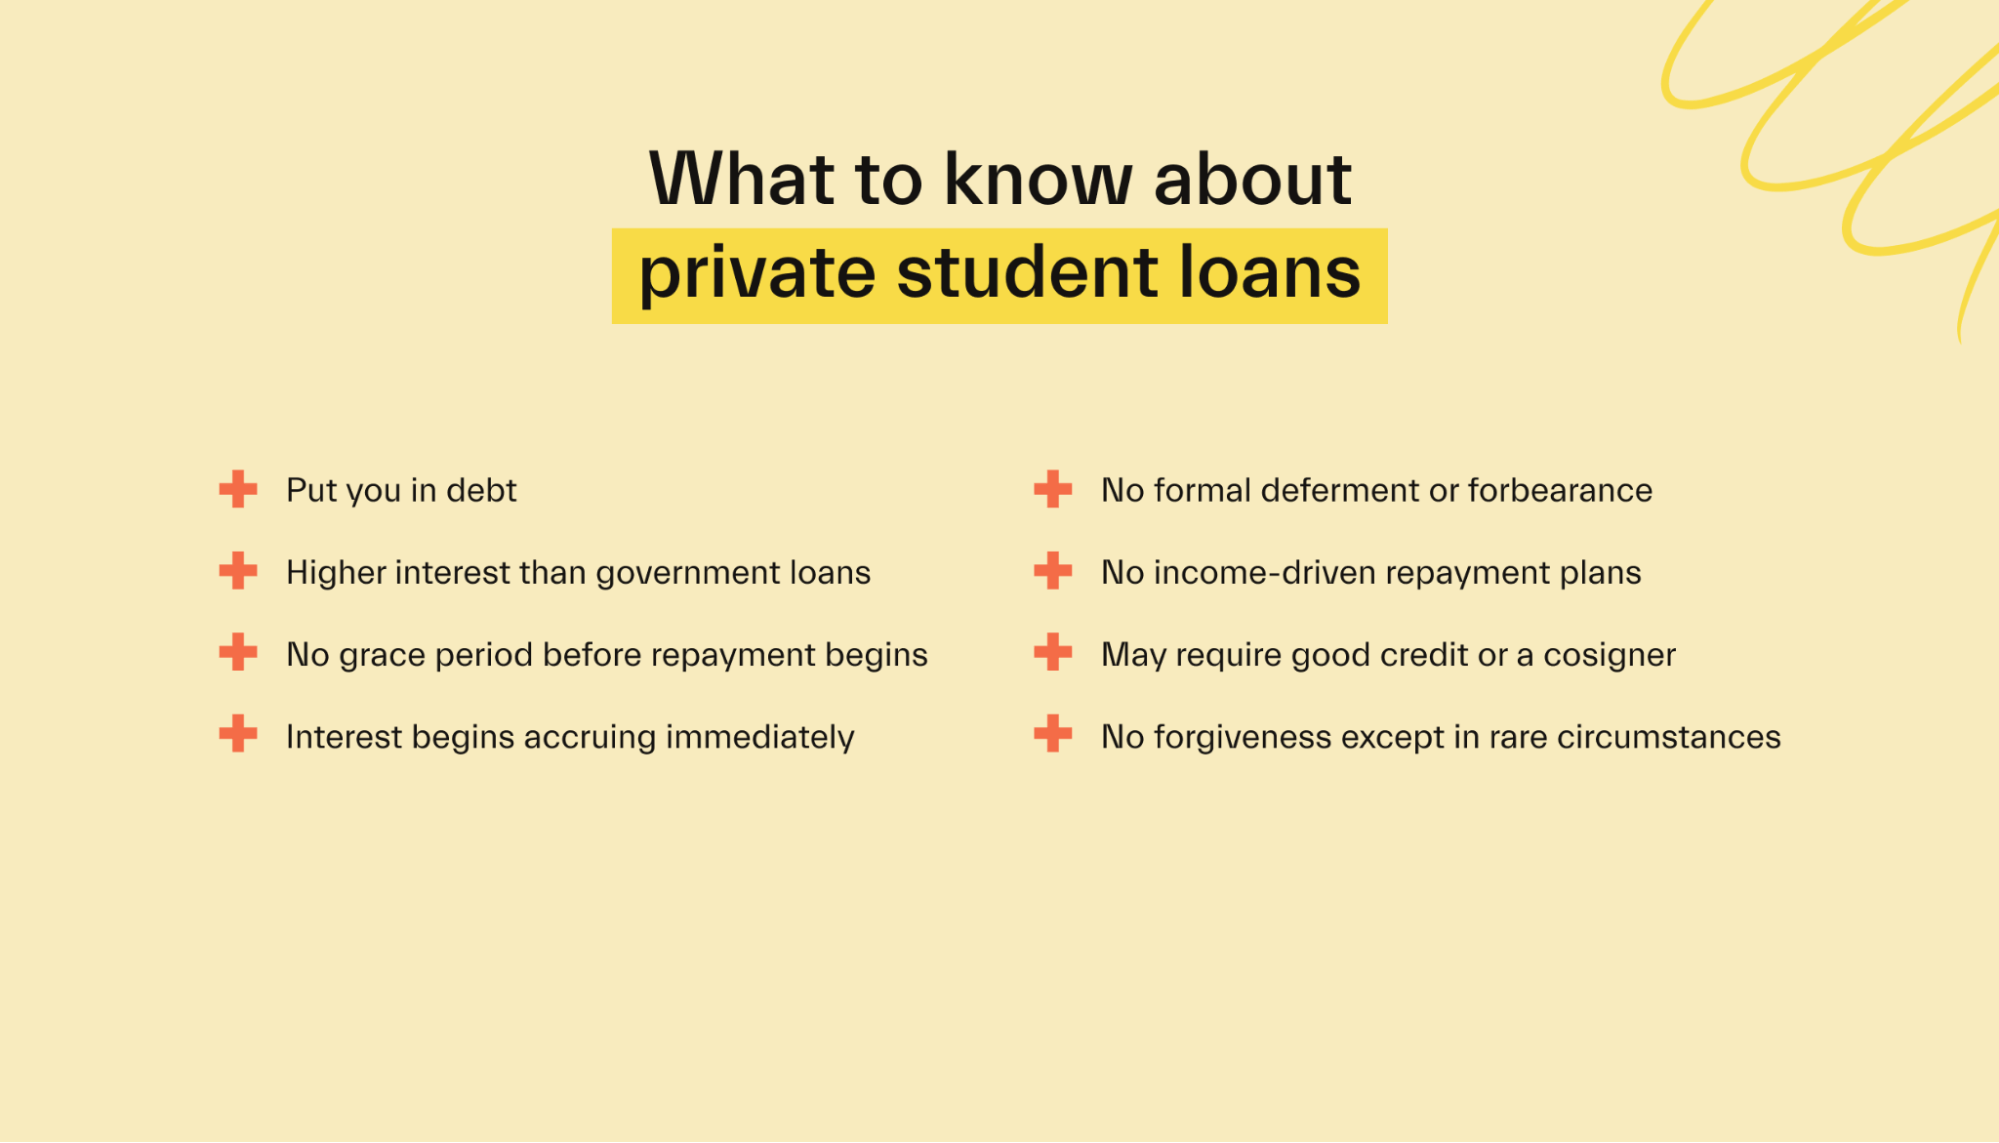 What to know about private student loans